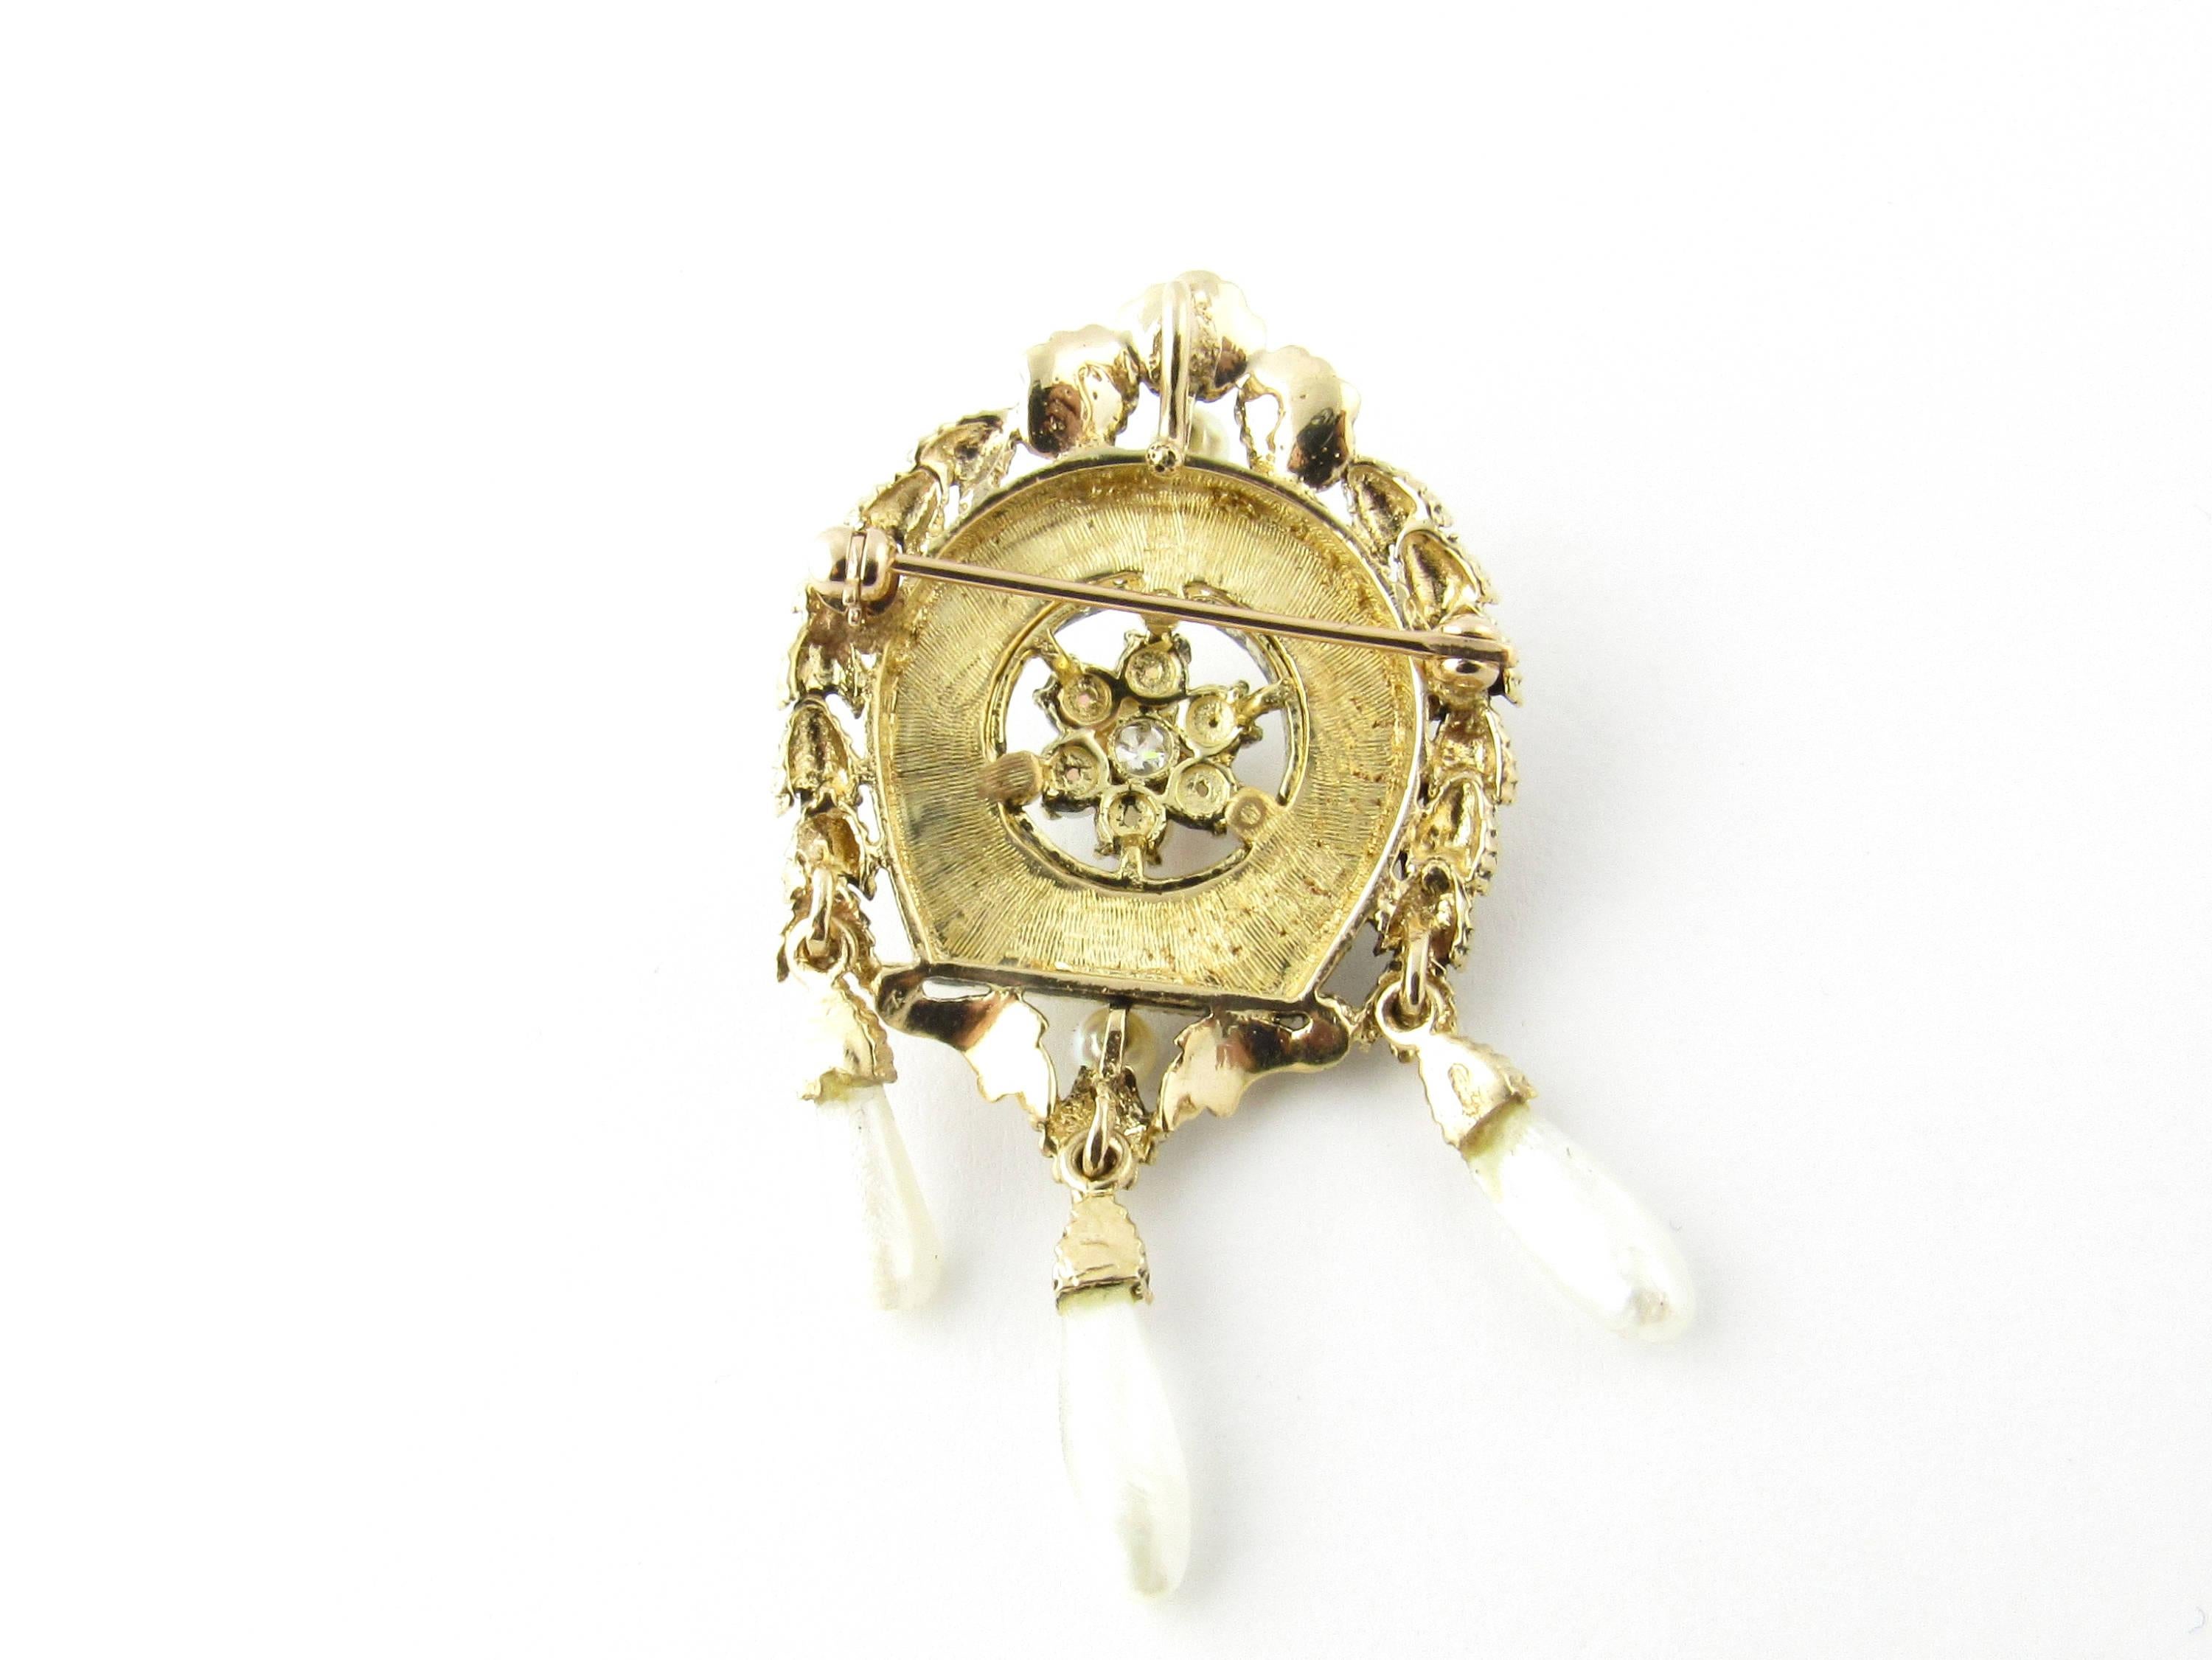 Antique 14 Karat Yellow Gold Opal and Pearl Brooch or Pendant 1